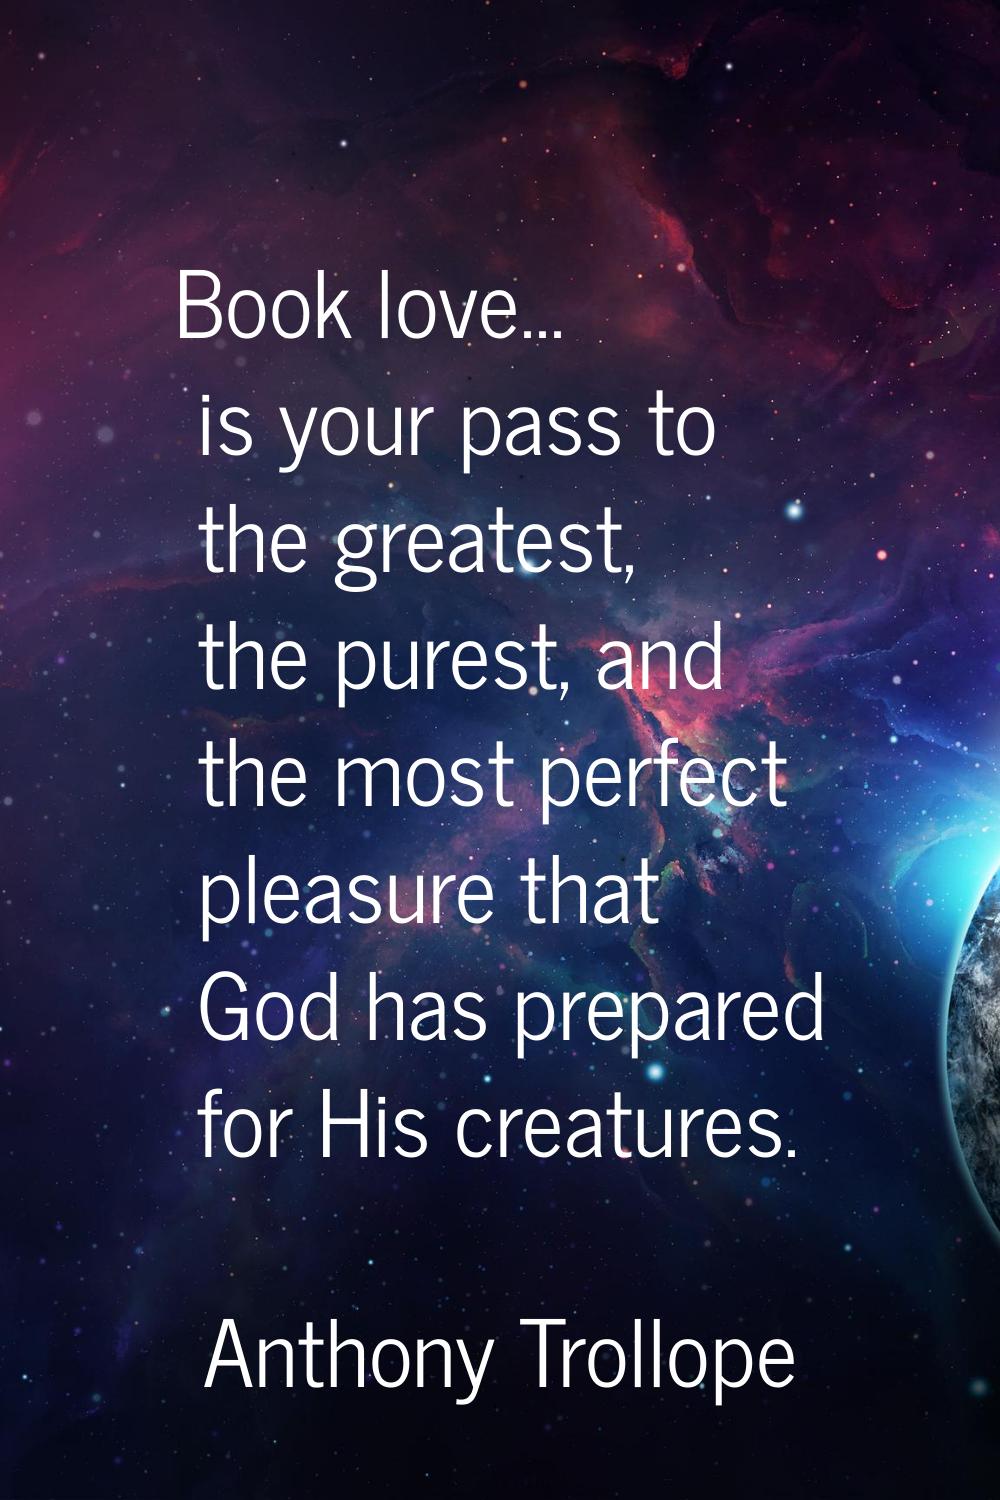 Book love... is your pass to the greatest, the purest, and the most perfect pleasure that God has p